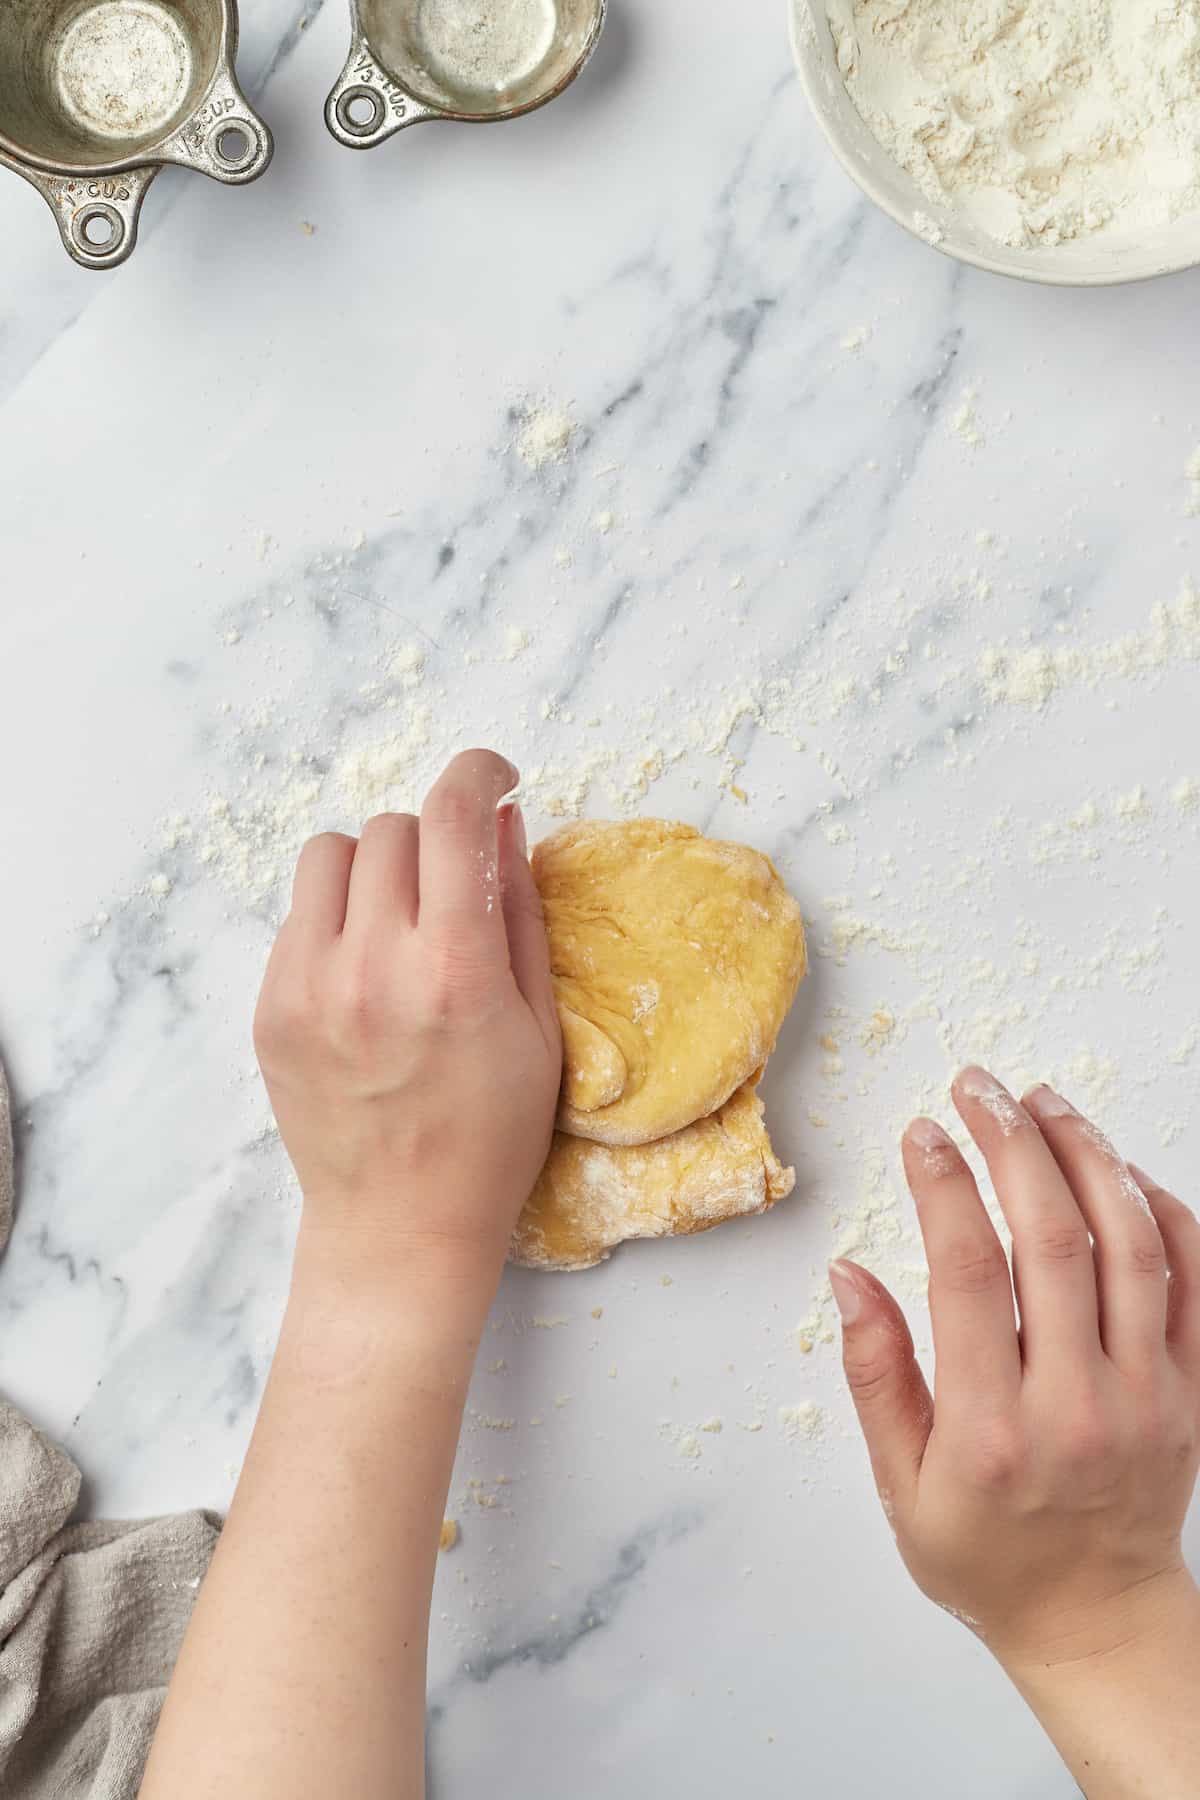 A hand kneading a batch of egg noodle dough on a marble countertop